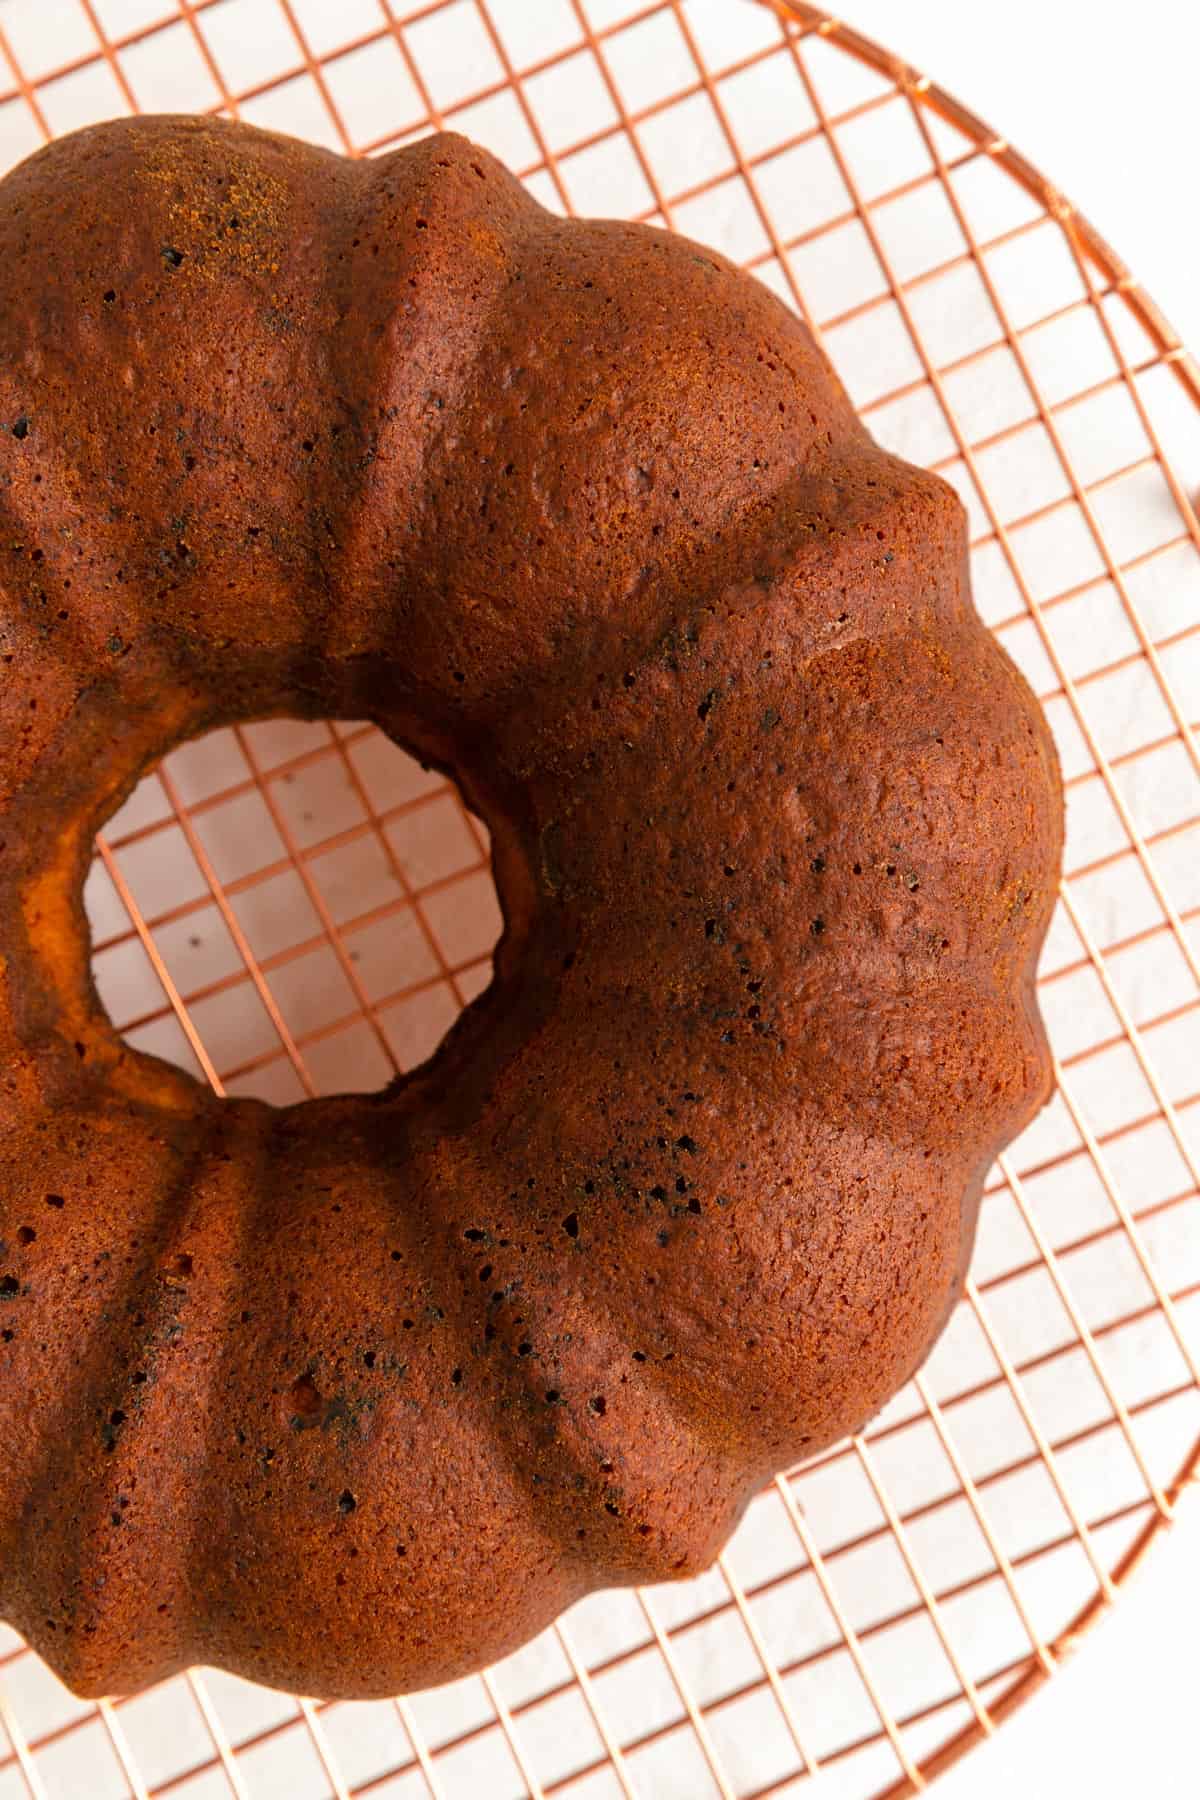 Baked raspberry Bundt cake turned out onto copper wire rack.